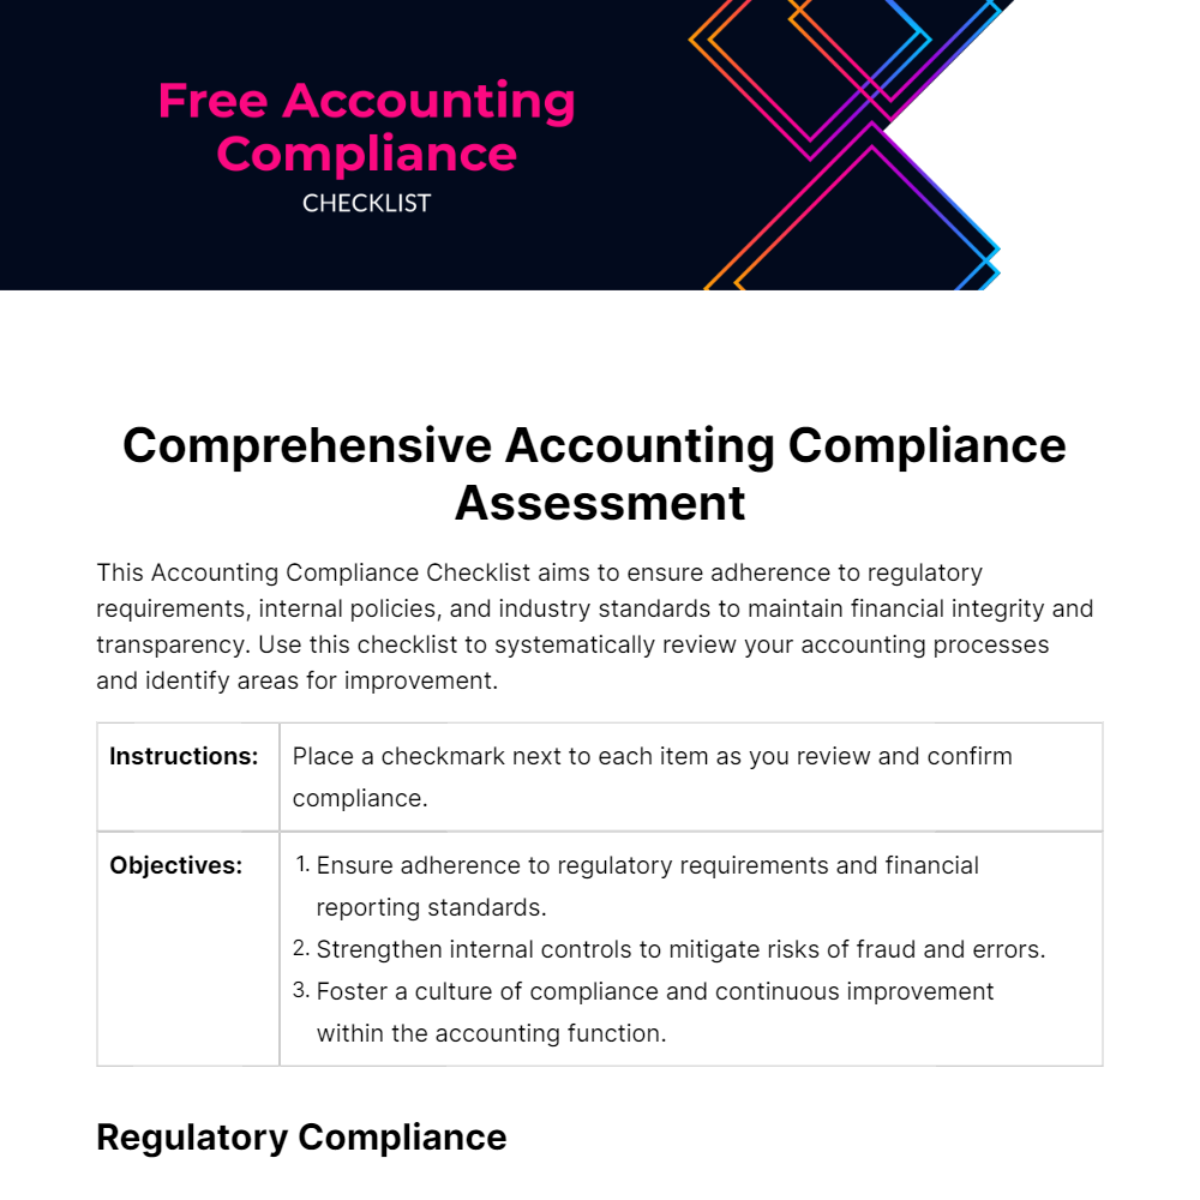 Free Accounting Compliance Checklist Template